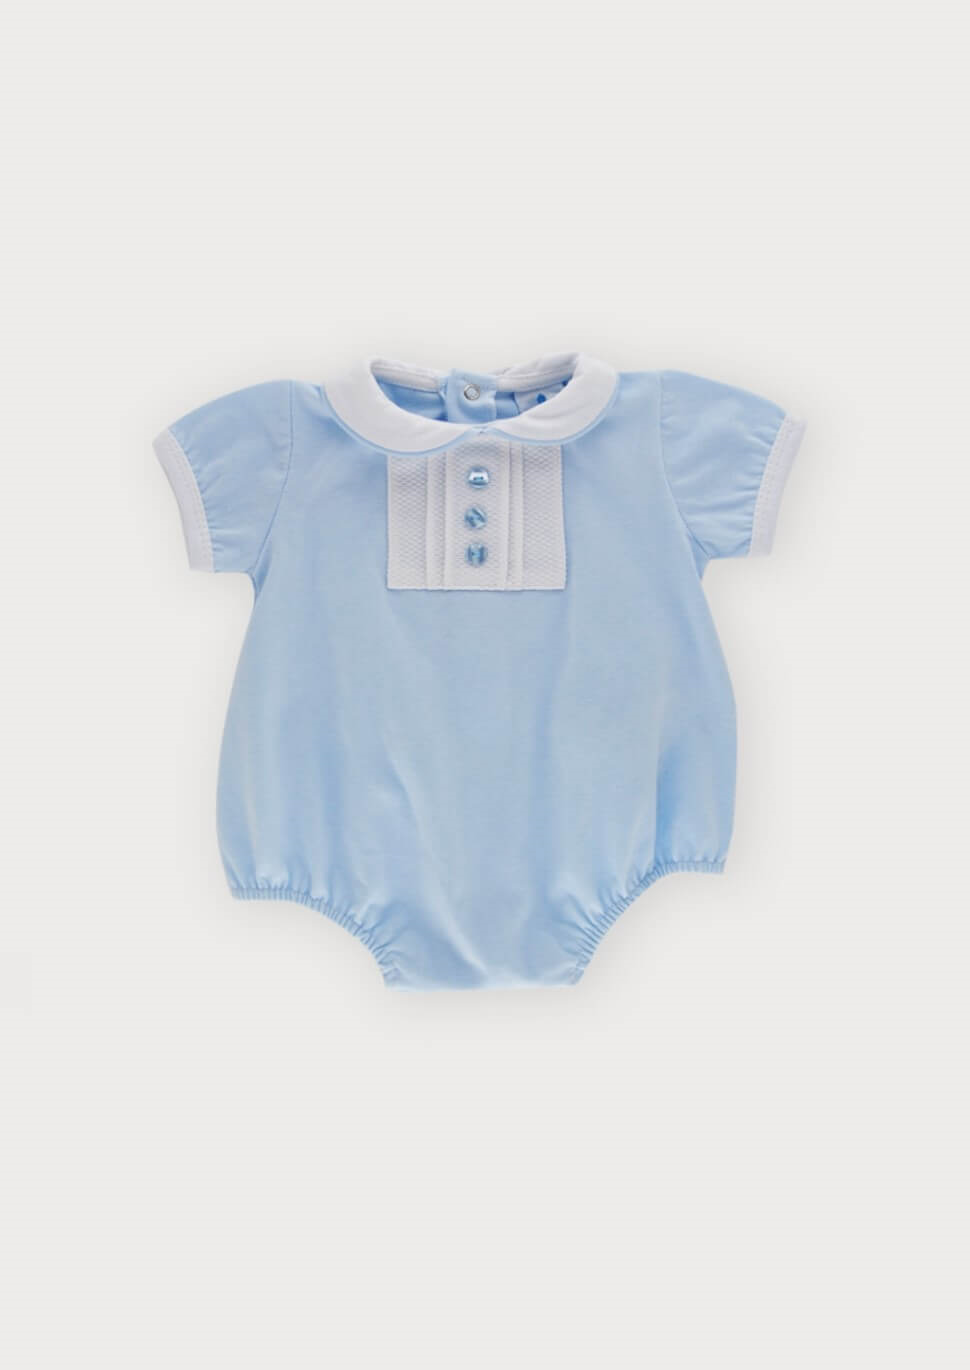 rry romper by sardon from tors childrens wear